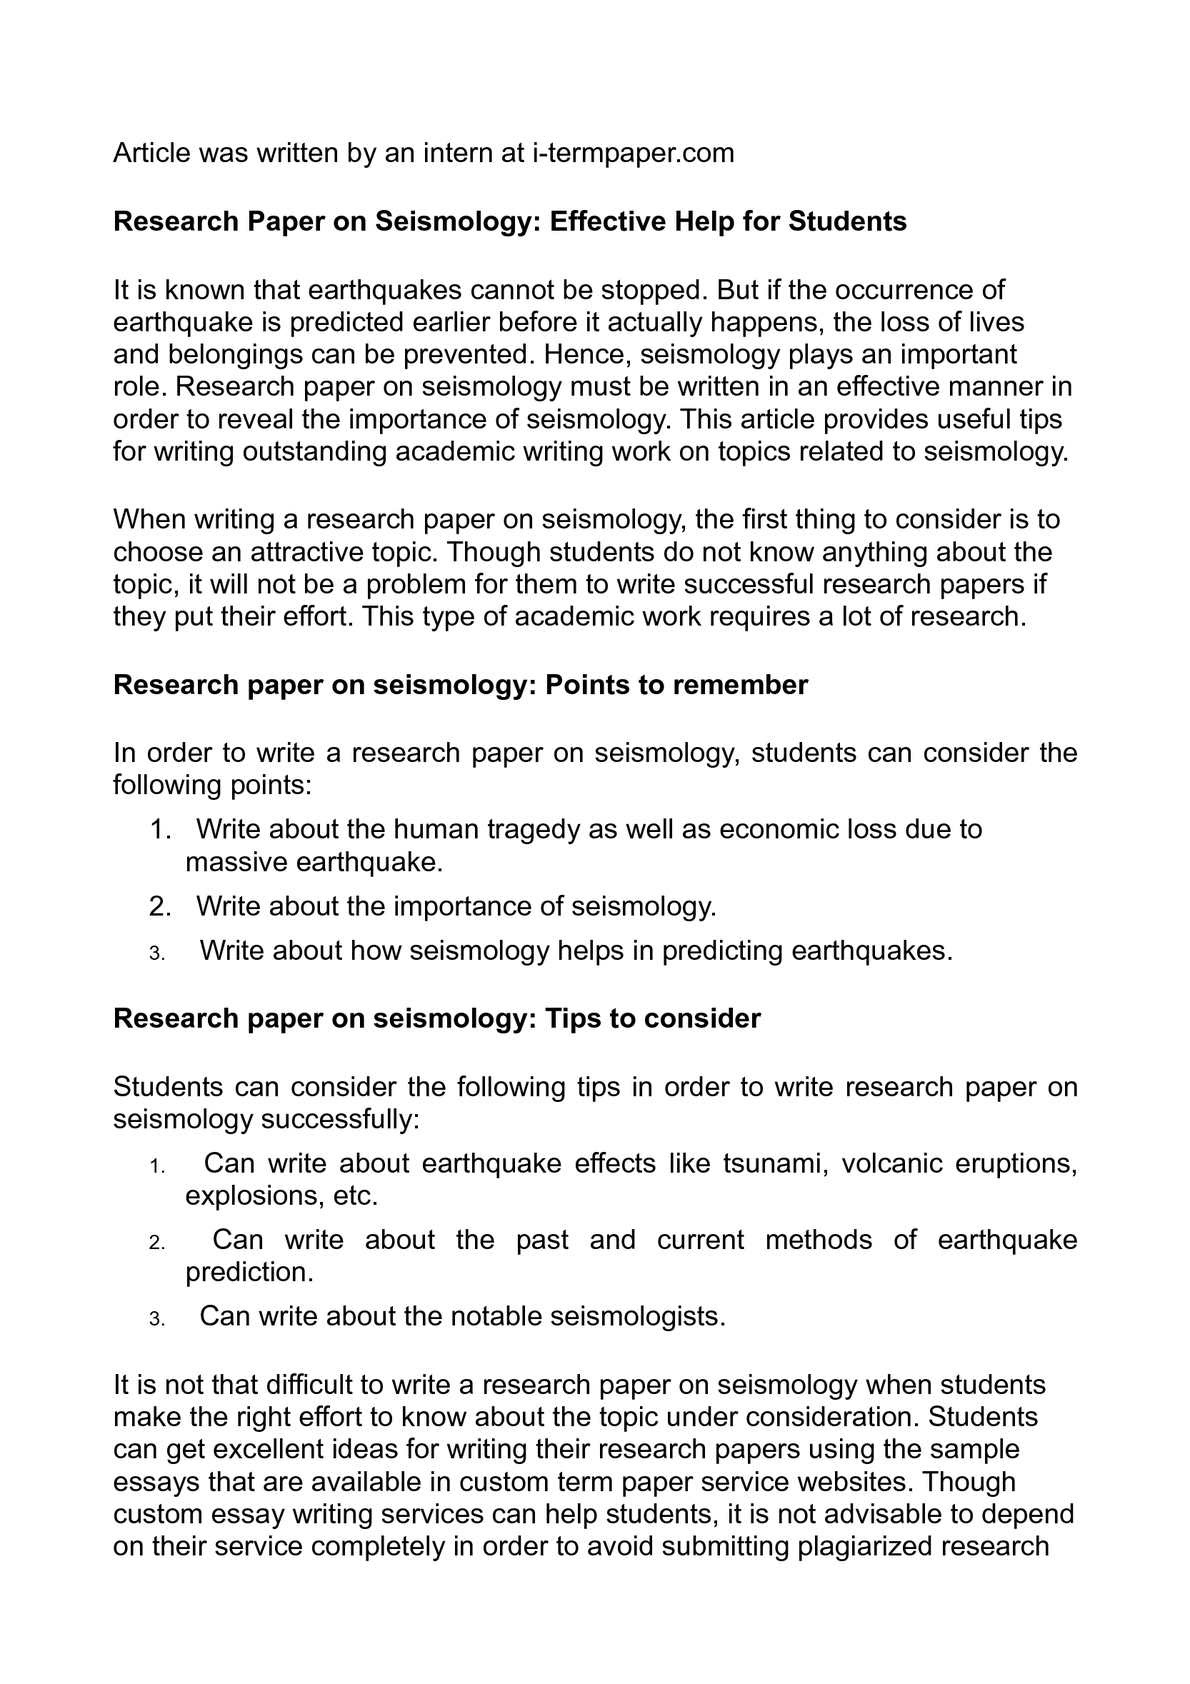 earthquake research paper